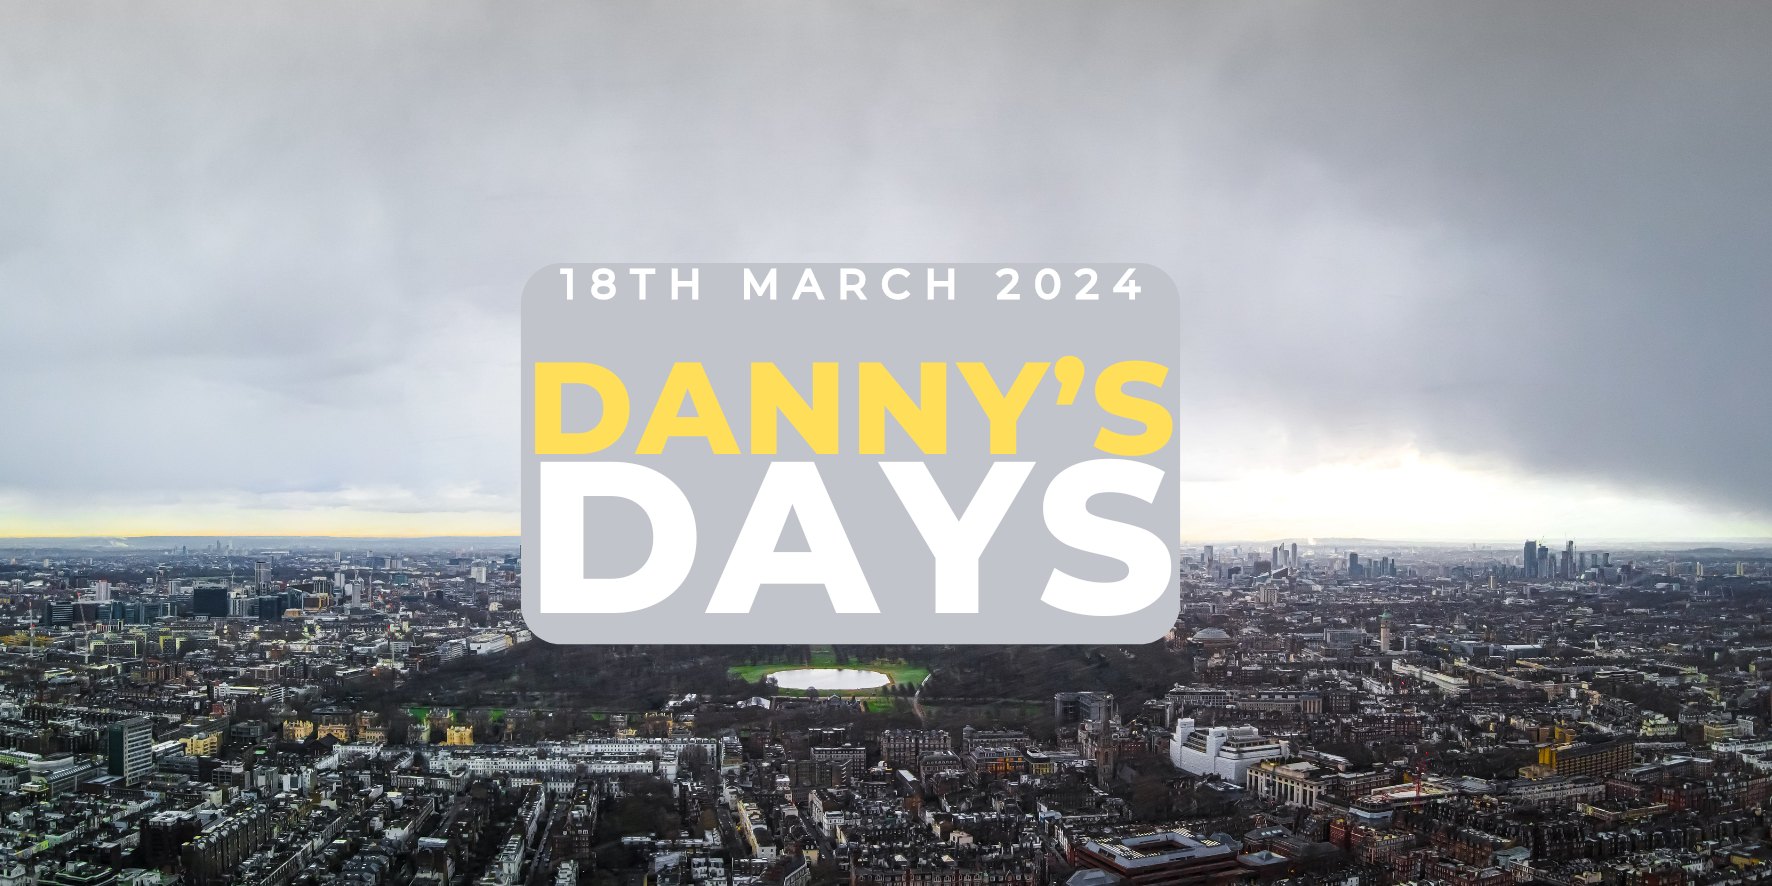 Danny's Days - 18th March 2024